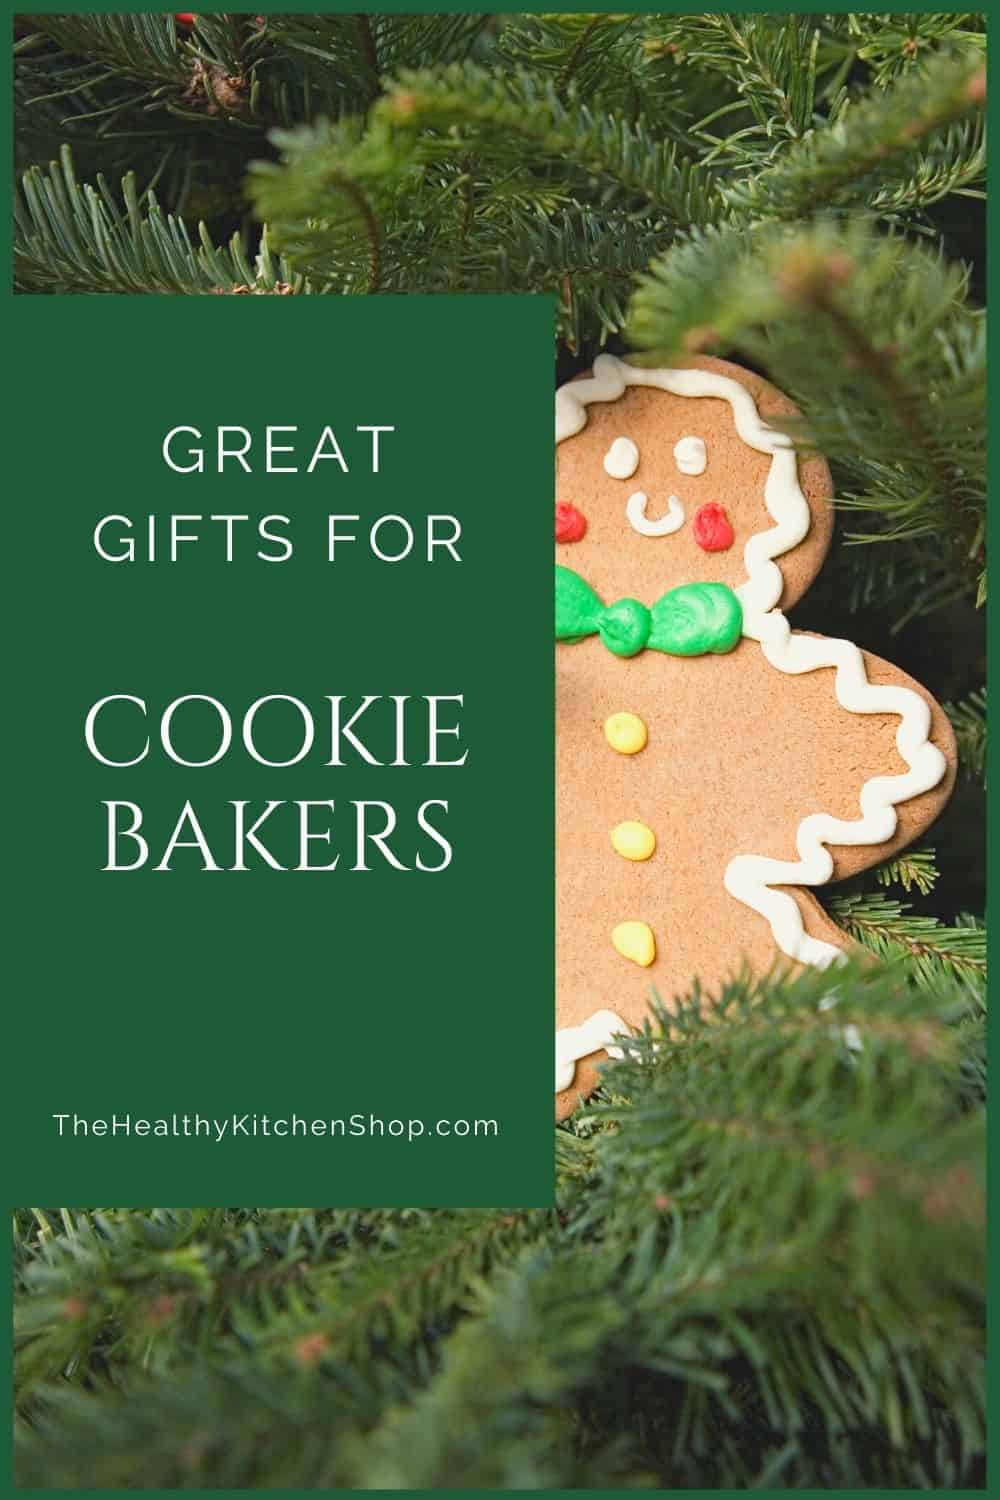 Great Gifts for Cookie Bakers